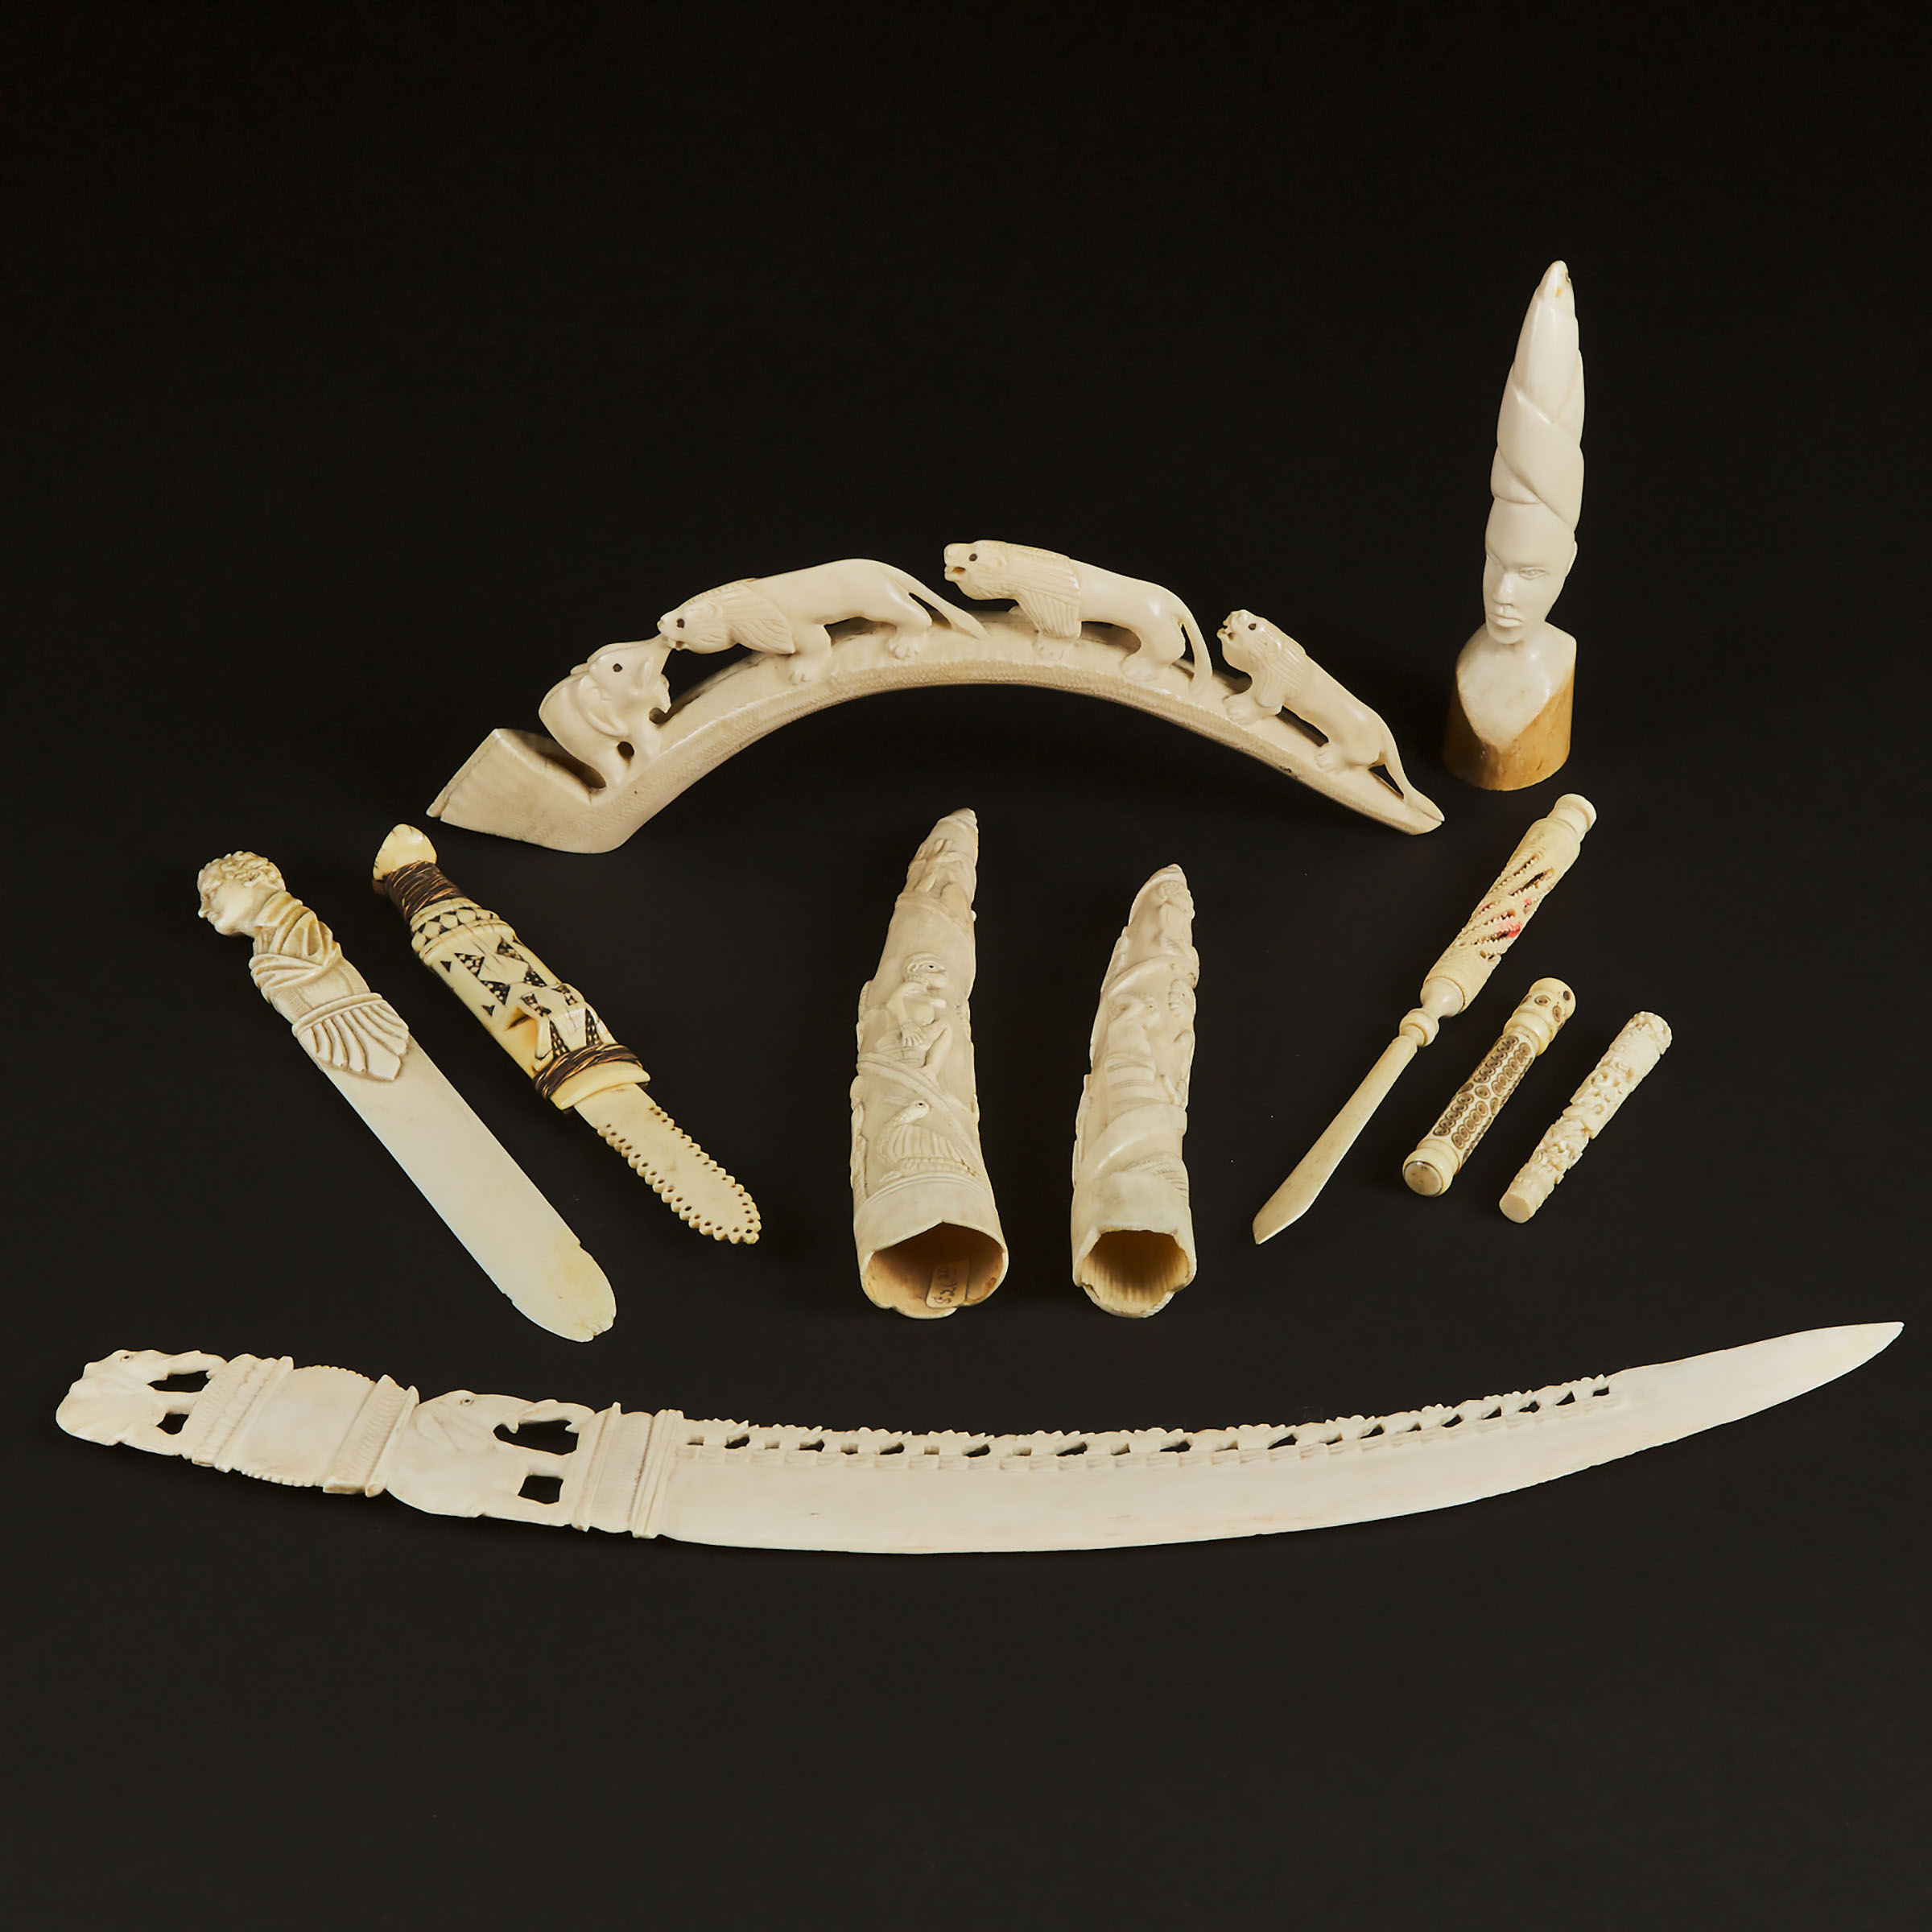 A Group of Ten Ivory and Bone Needle 3ac7a9